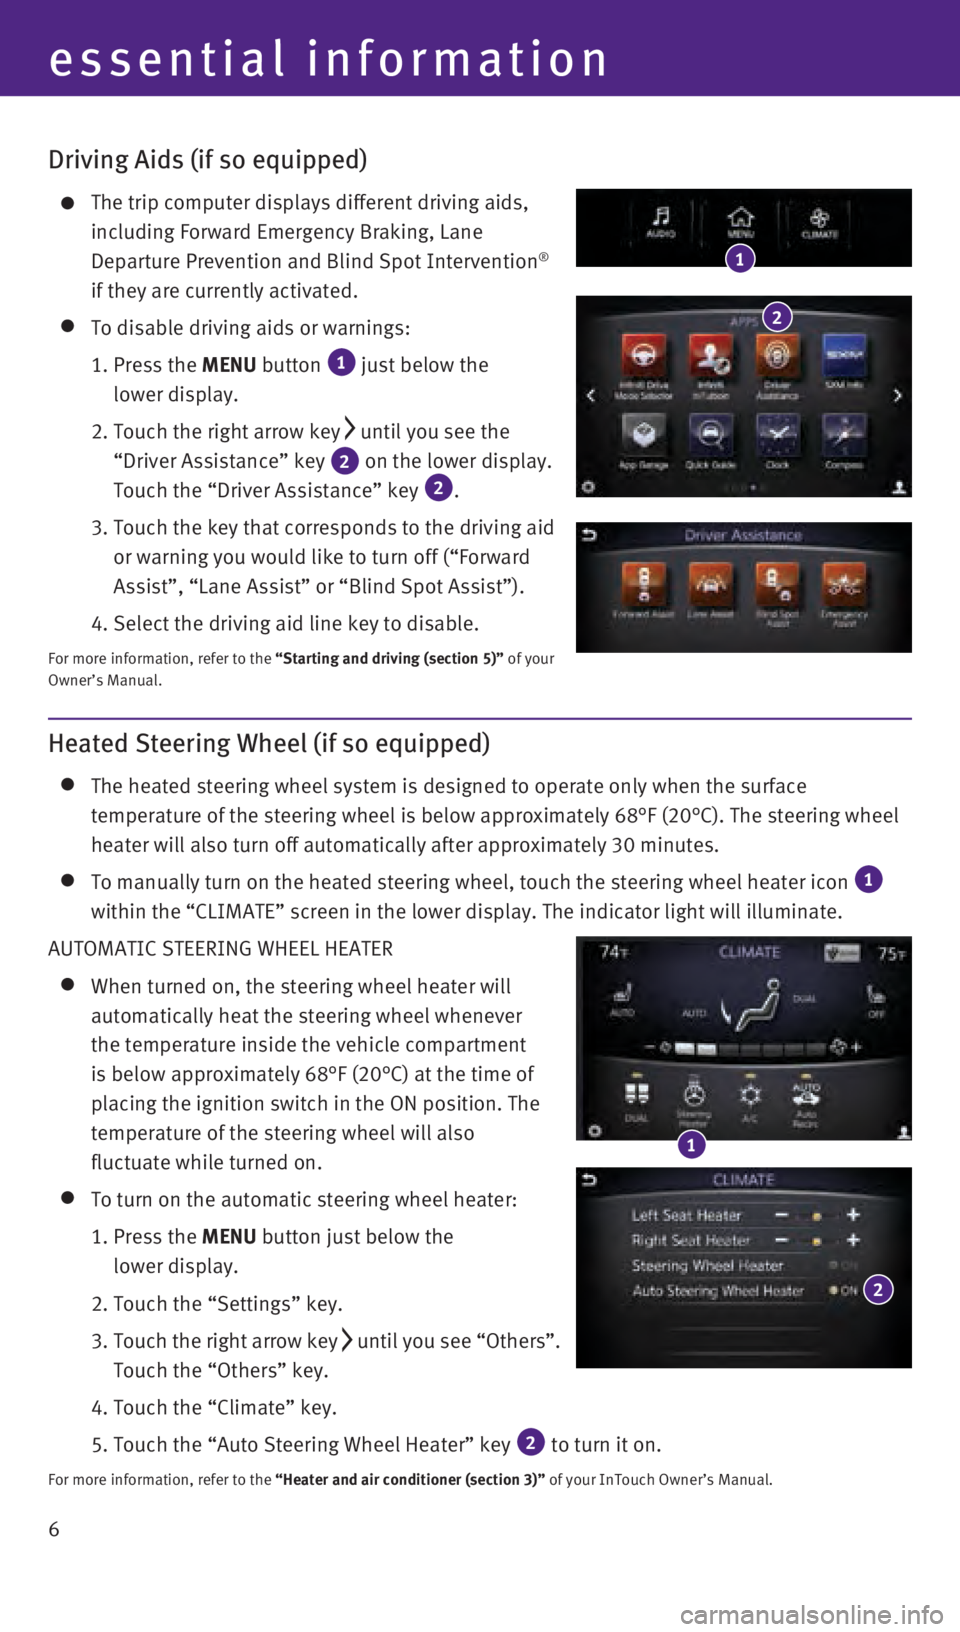 INFINITI Q50 2016  Quick Reference Guide 6
Driving Aids (if so equipped)
    The trip computer displays different driving aids, 
including Forward Emergency Braking, Lane 
Departure Prevention and Blind Spot Intervention
® 
if they are curr